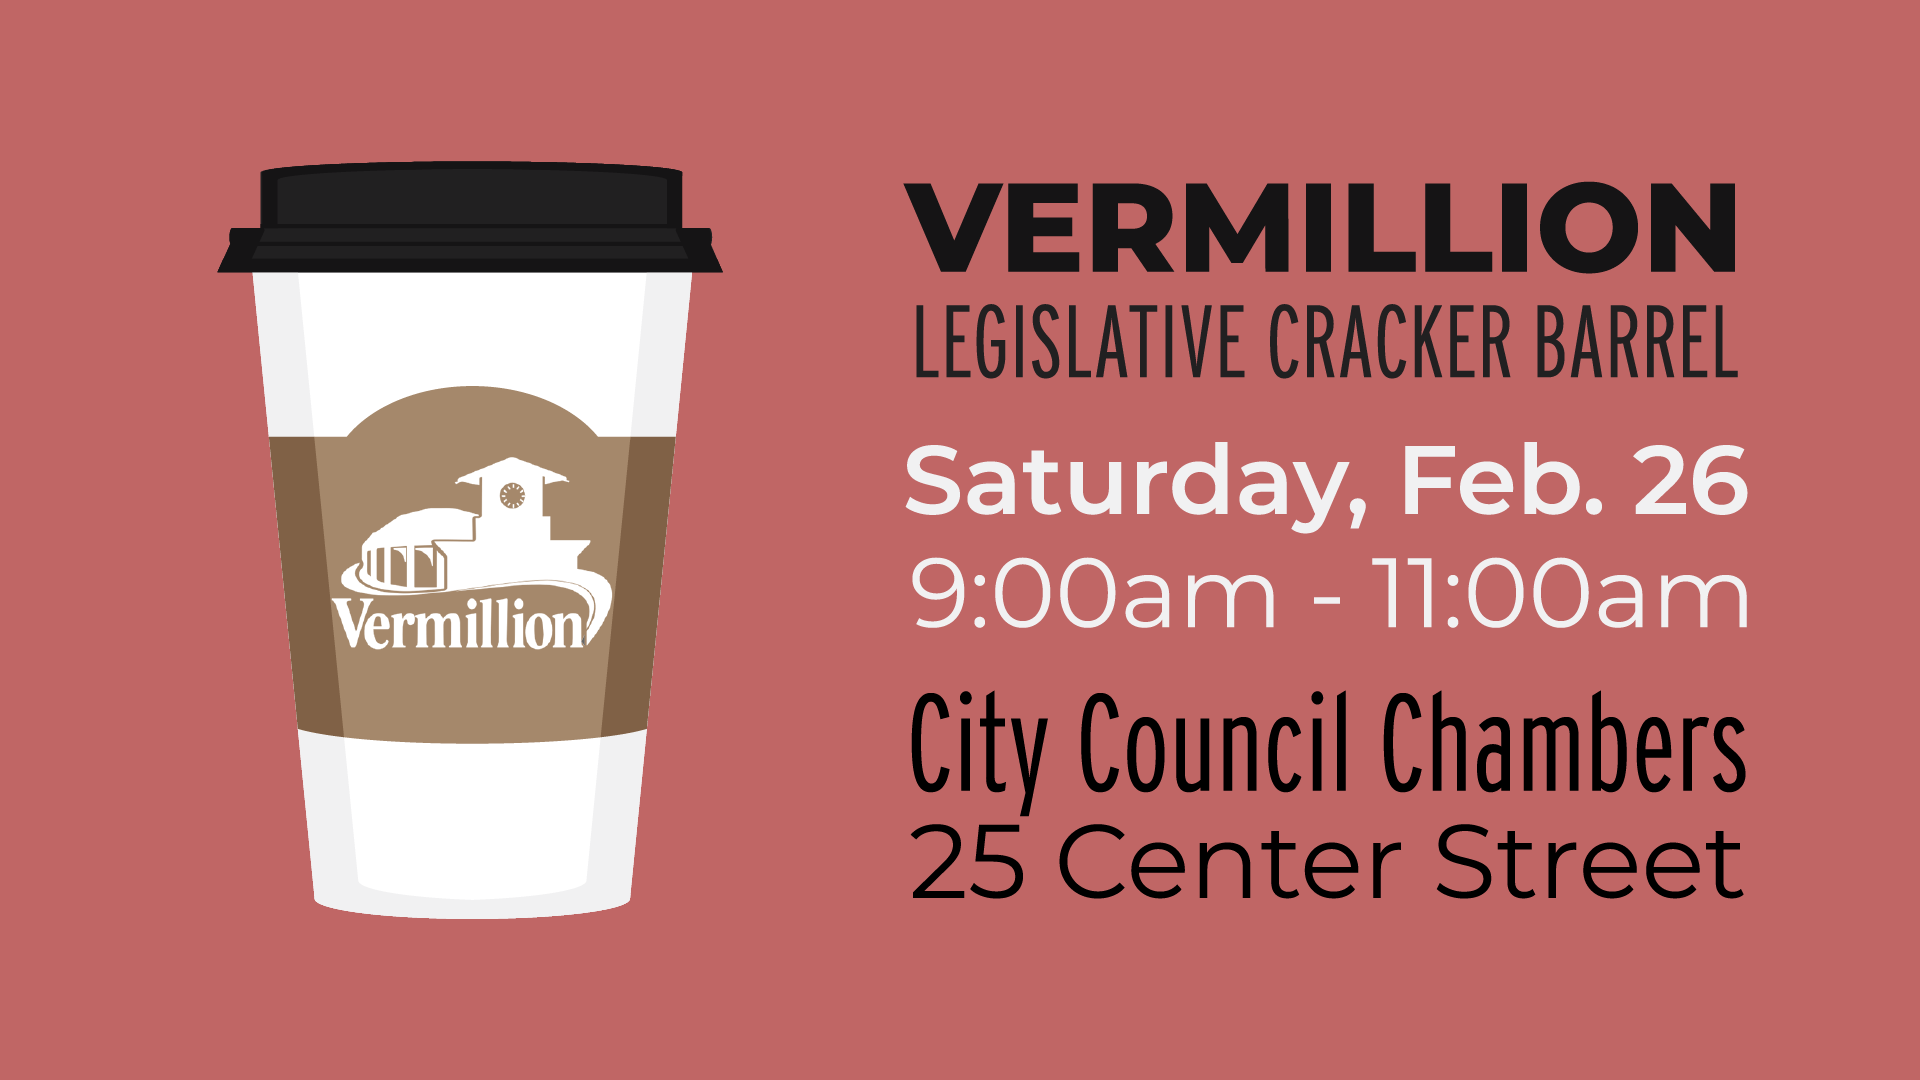 to-go coffee cup on red background with sleeve featuring Vermillion Chamber & Development Company logo beside text with details of Feb 26 legislative cracker barrel